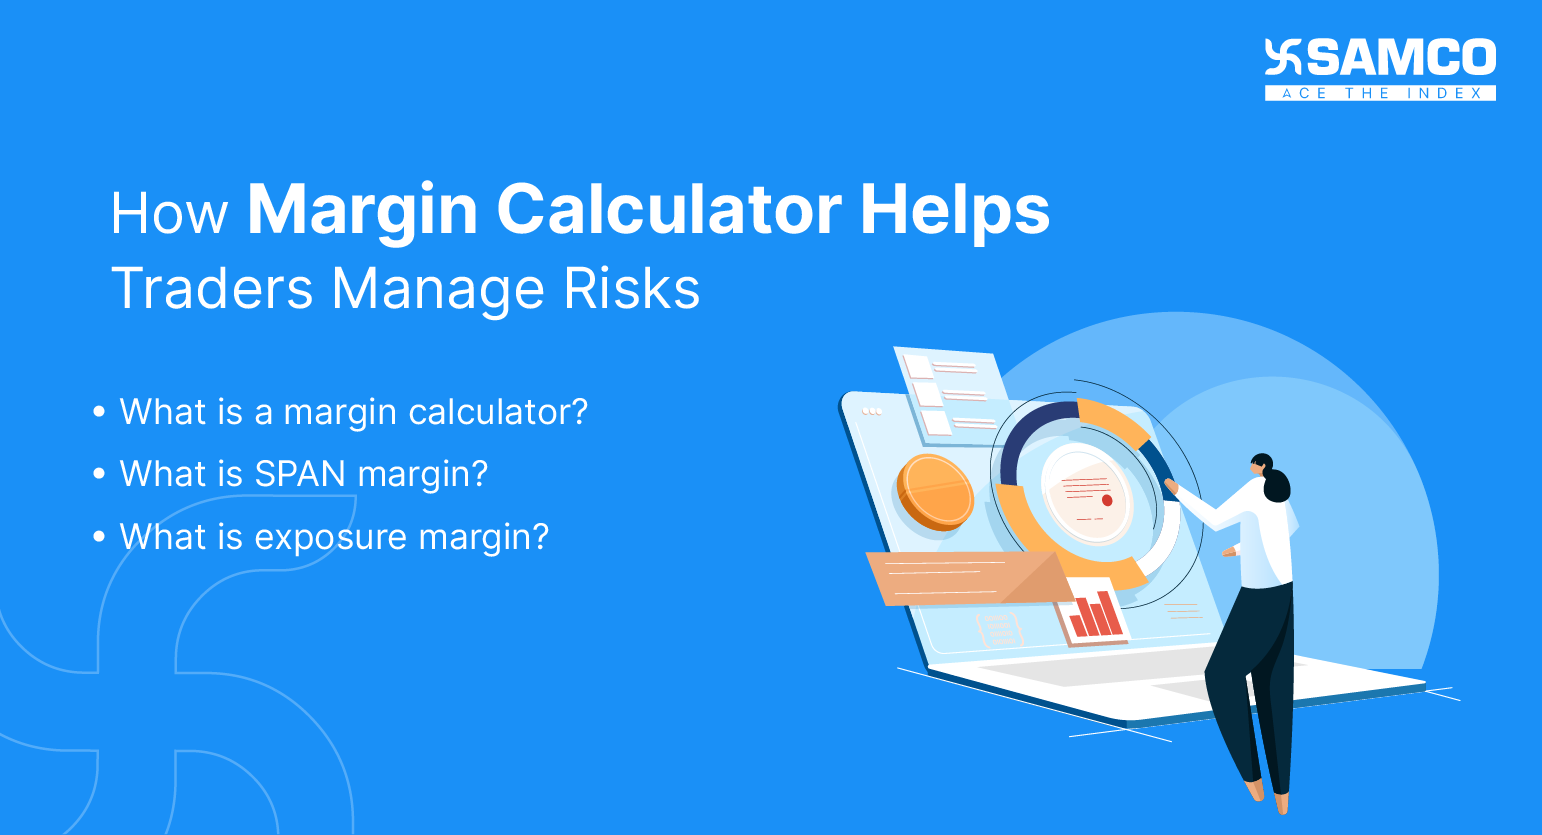 How to Use a Brokerage Calculator to Determine Your Trading Costs?